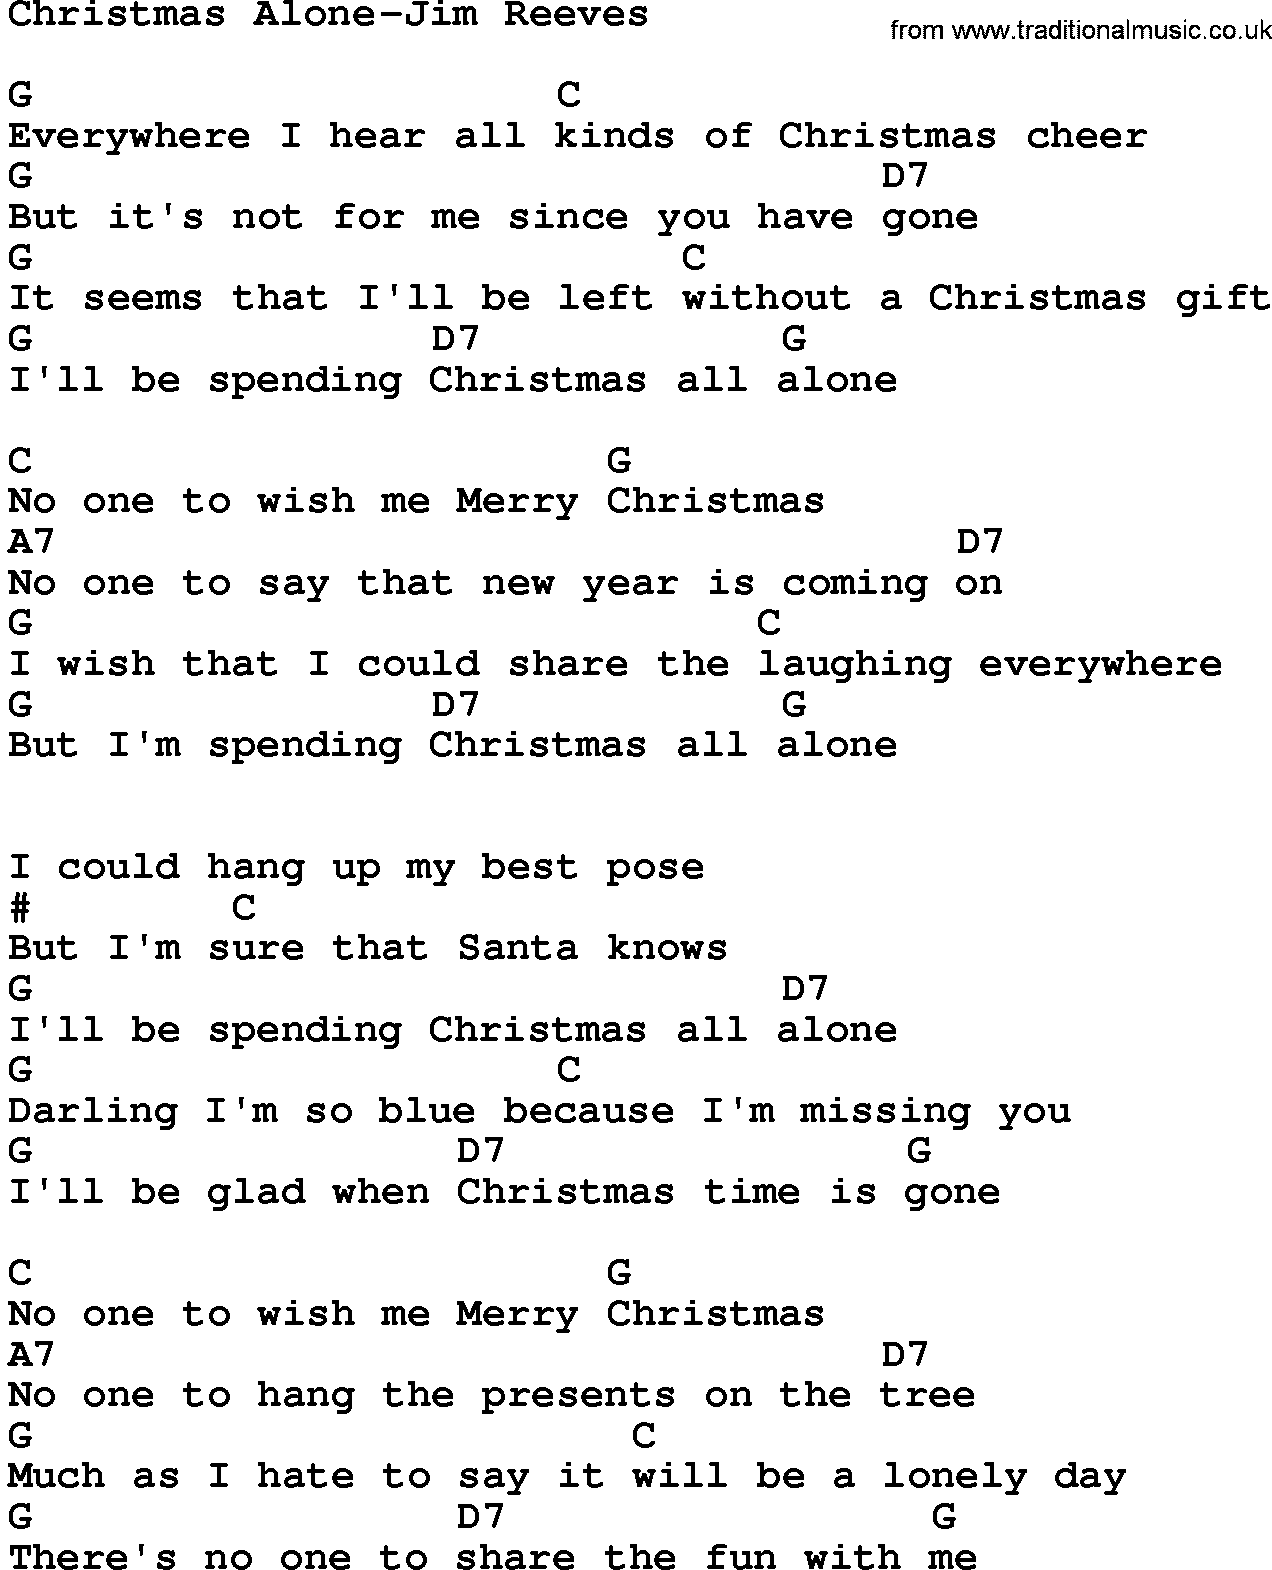 Country music song: Christmas Alone-Jim Reeves lyrics and chords